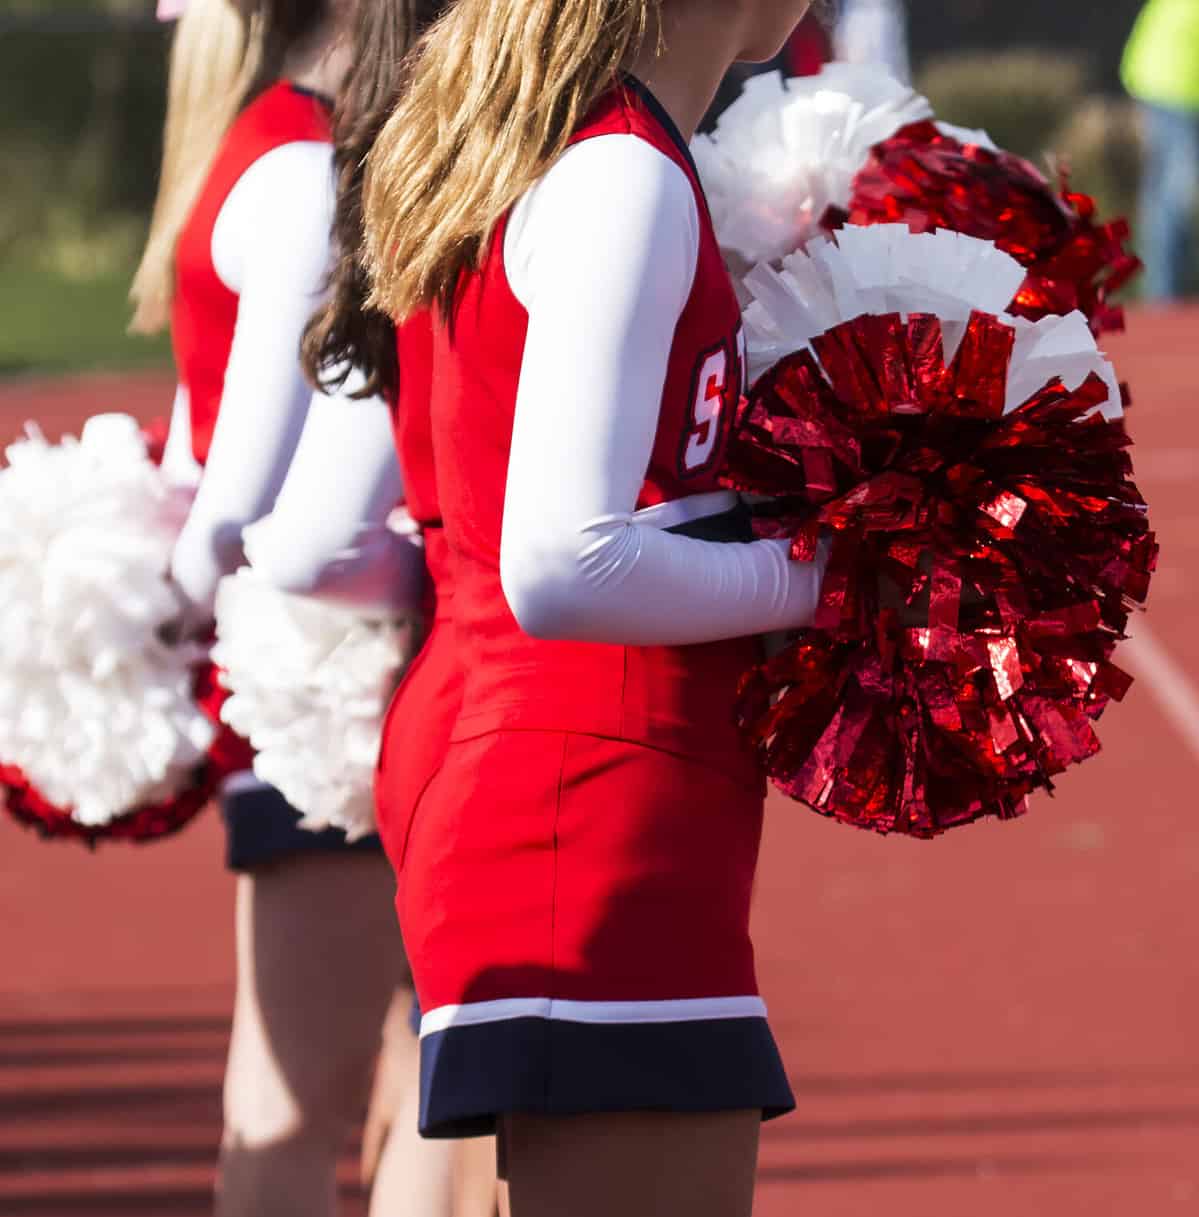 Cheerleaders paying attention to the football game while cheering for the home team at a local high school.